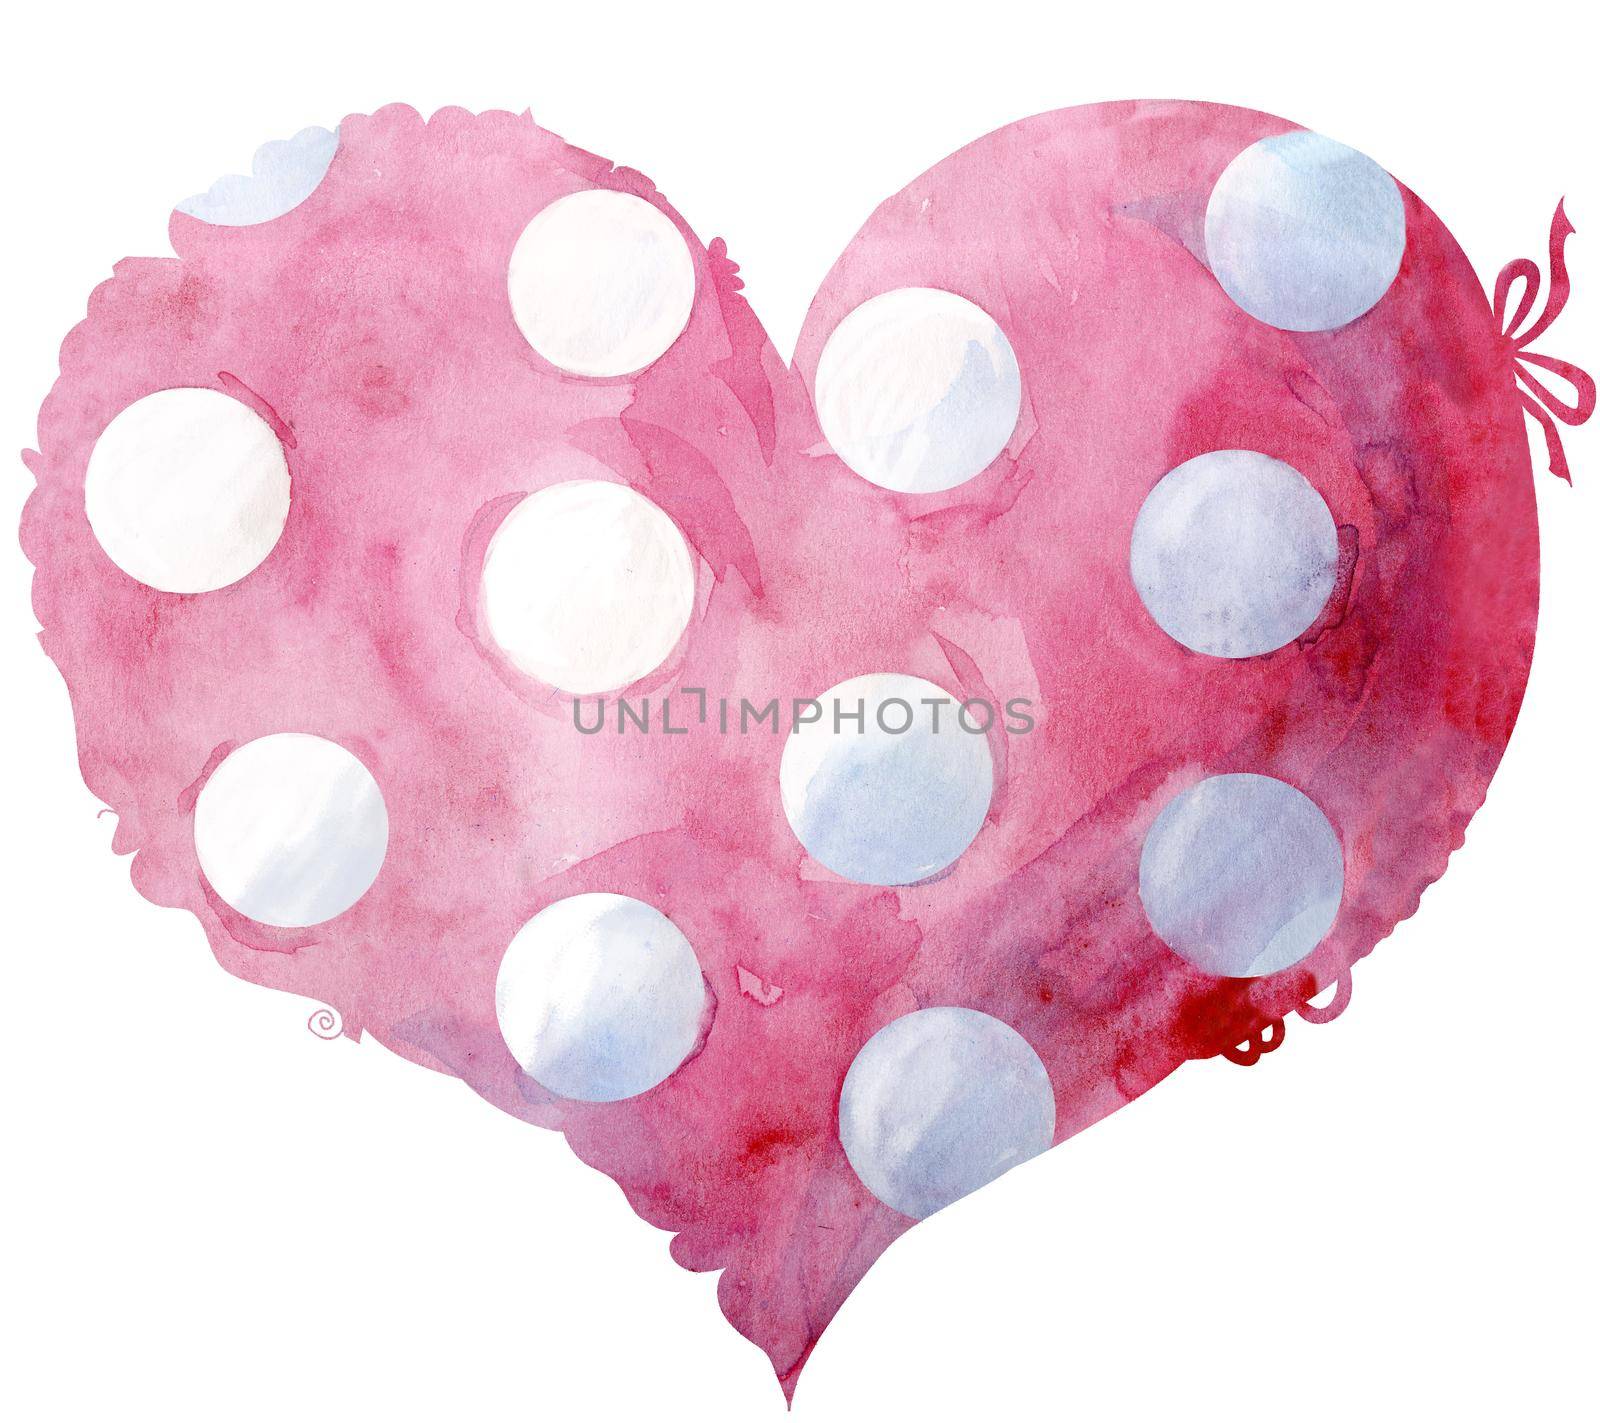 Watercolor pink heart with polka dots with a lace edge on a white background.